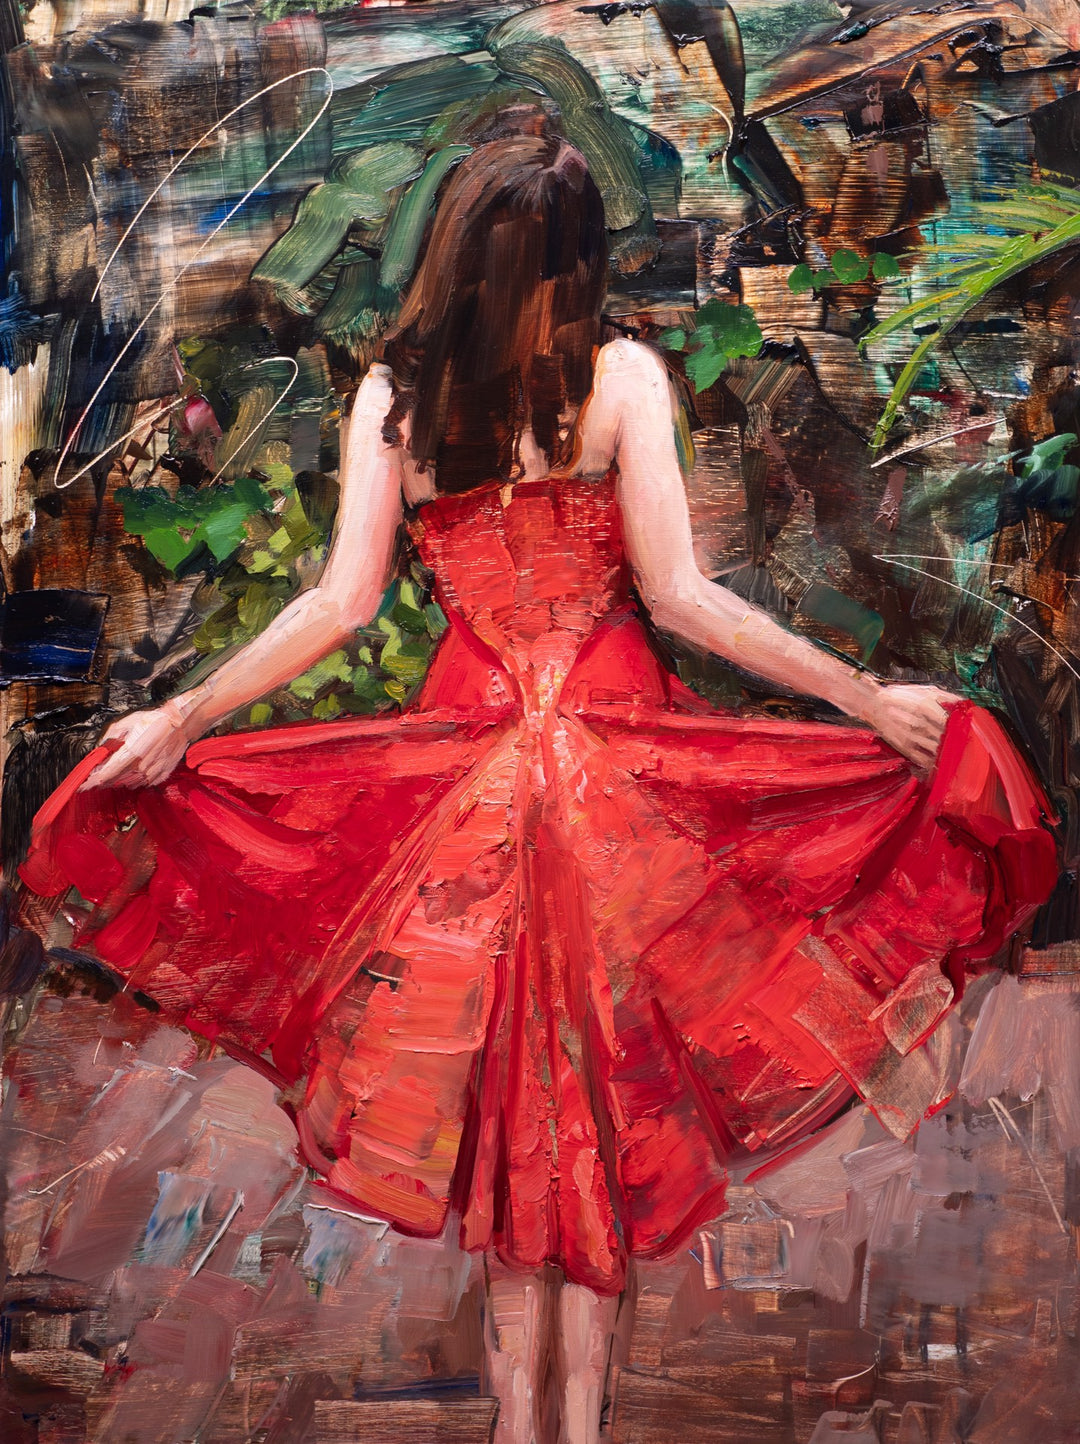 In Harmony," a captivating oil on panel by Matt Talbert, portrays an enchanting woman gracefully adorned in a vibrant red dress.